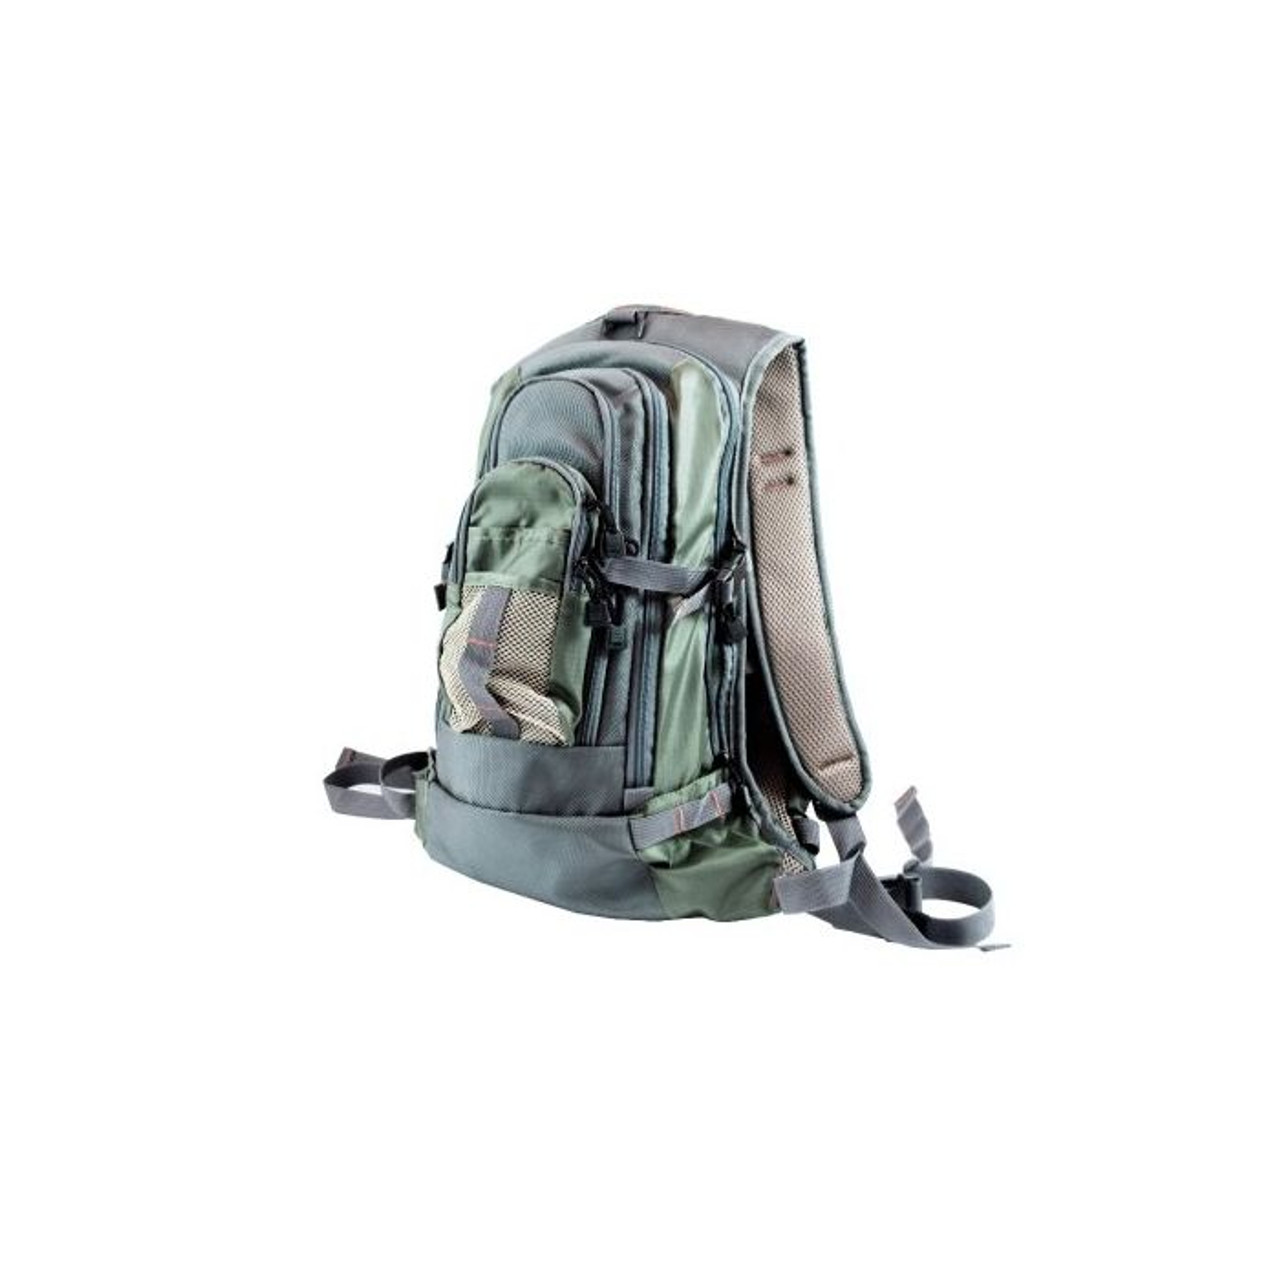 Wading Backpack with Chest Bag - Green/Tan - Ramsey Outdoor